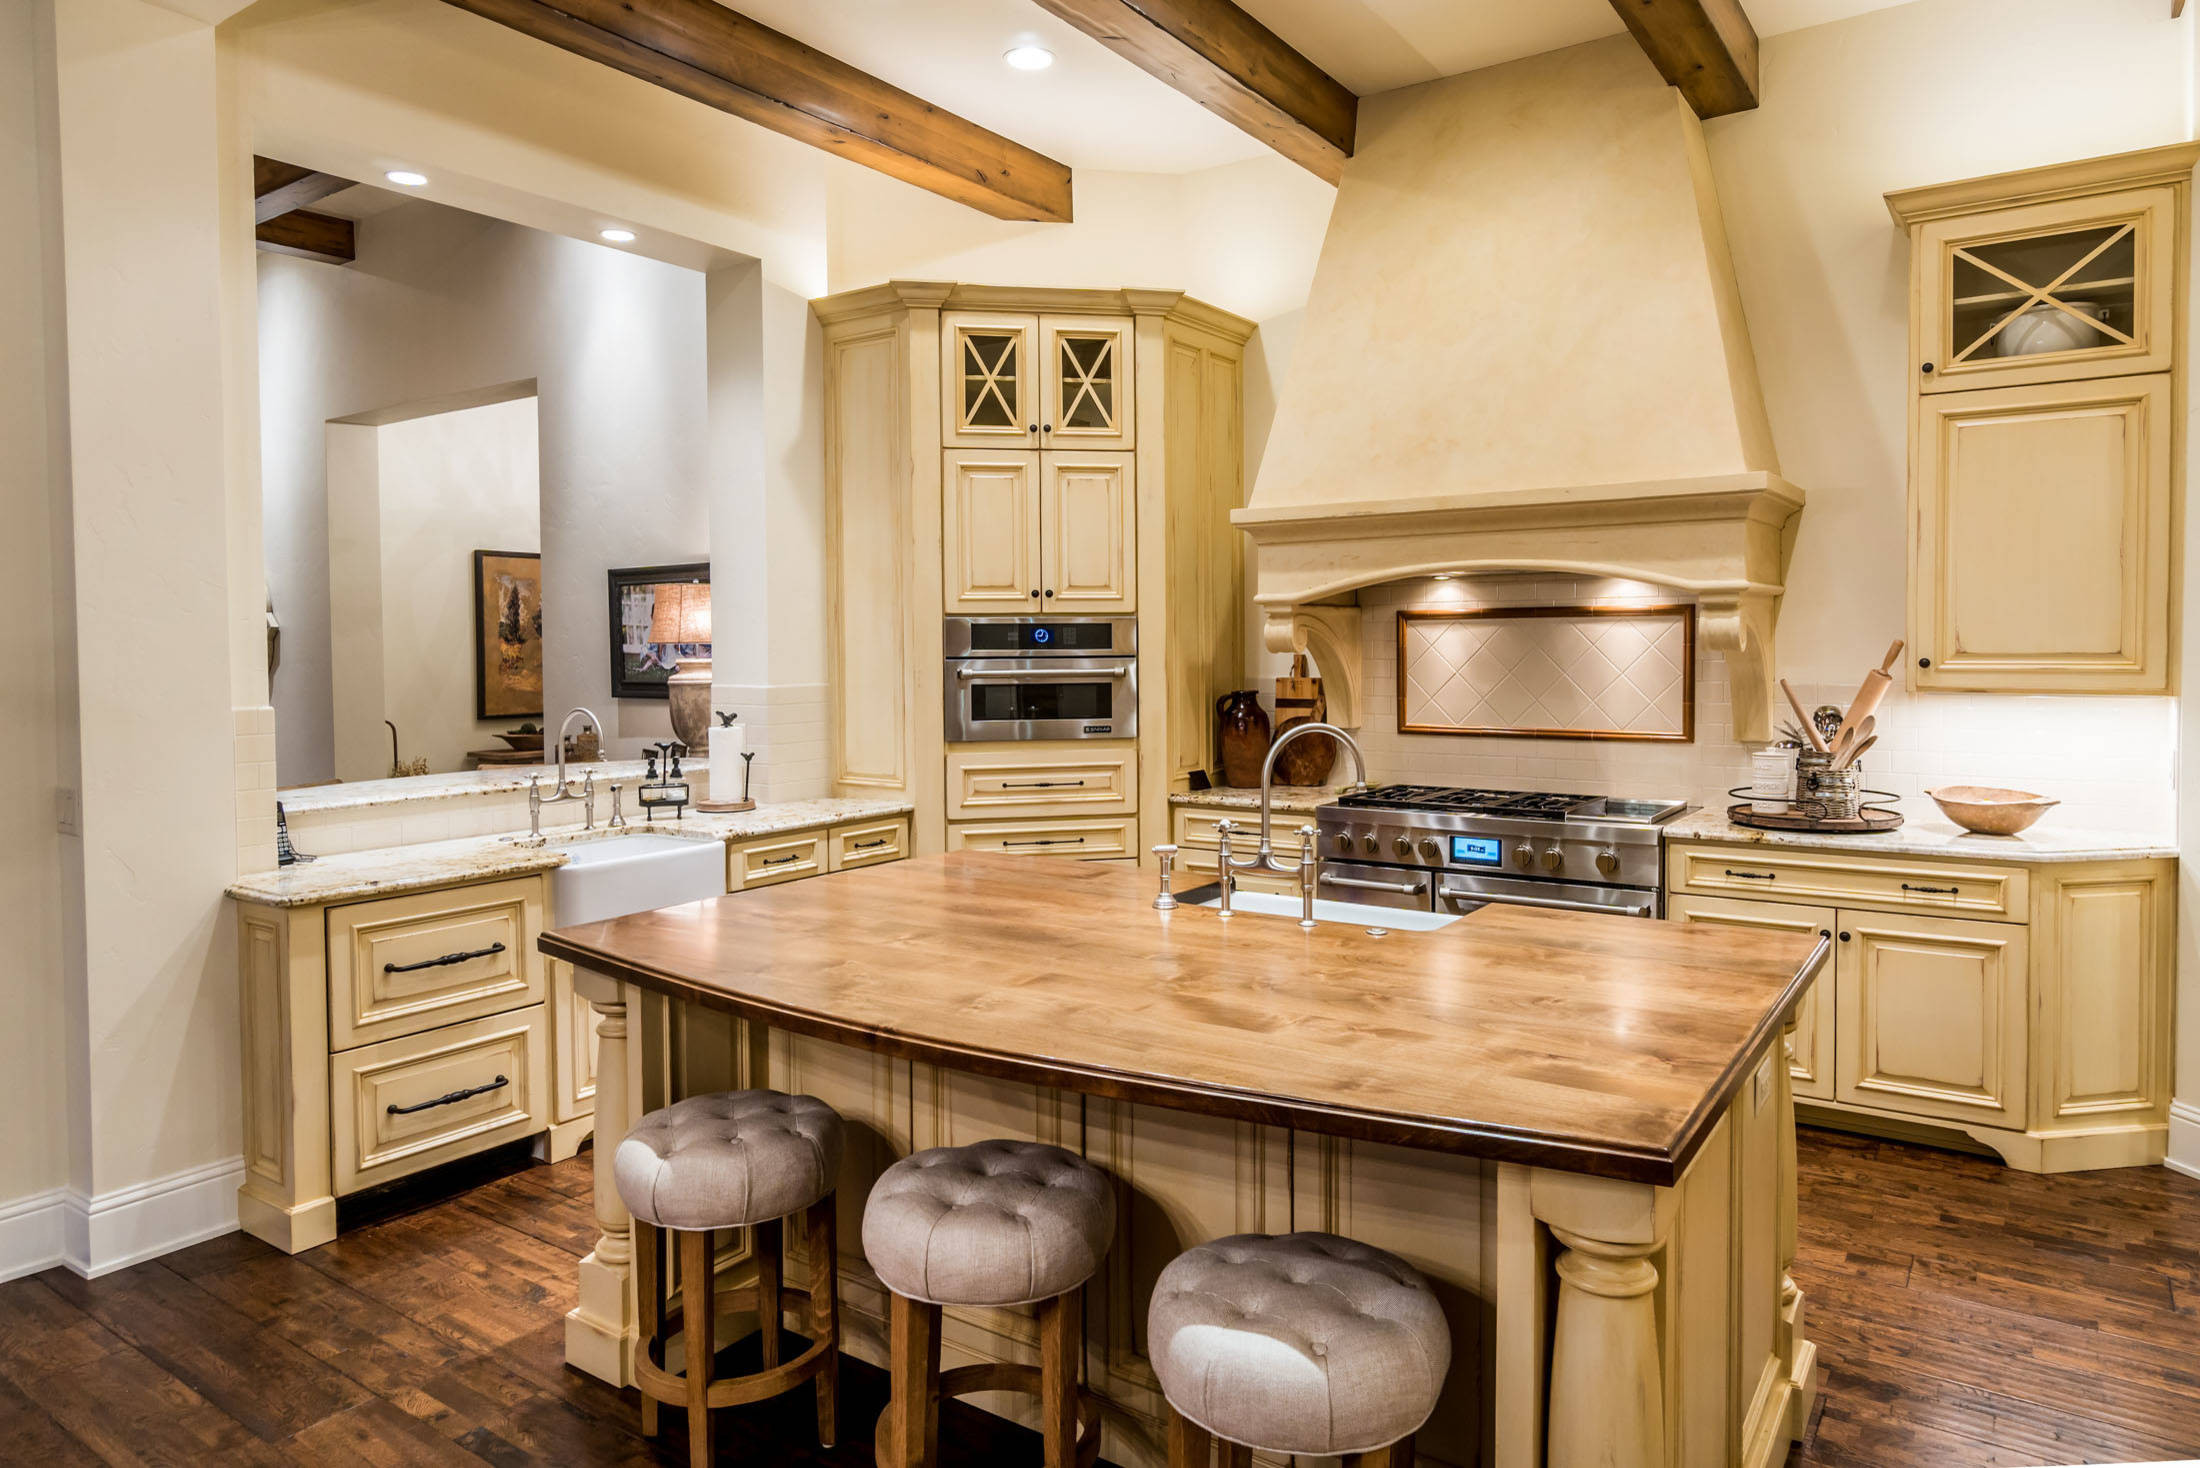 Rustic Kitchen Pictures
 15 Inspirational Rustic Kitchen Designs You Will Adore